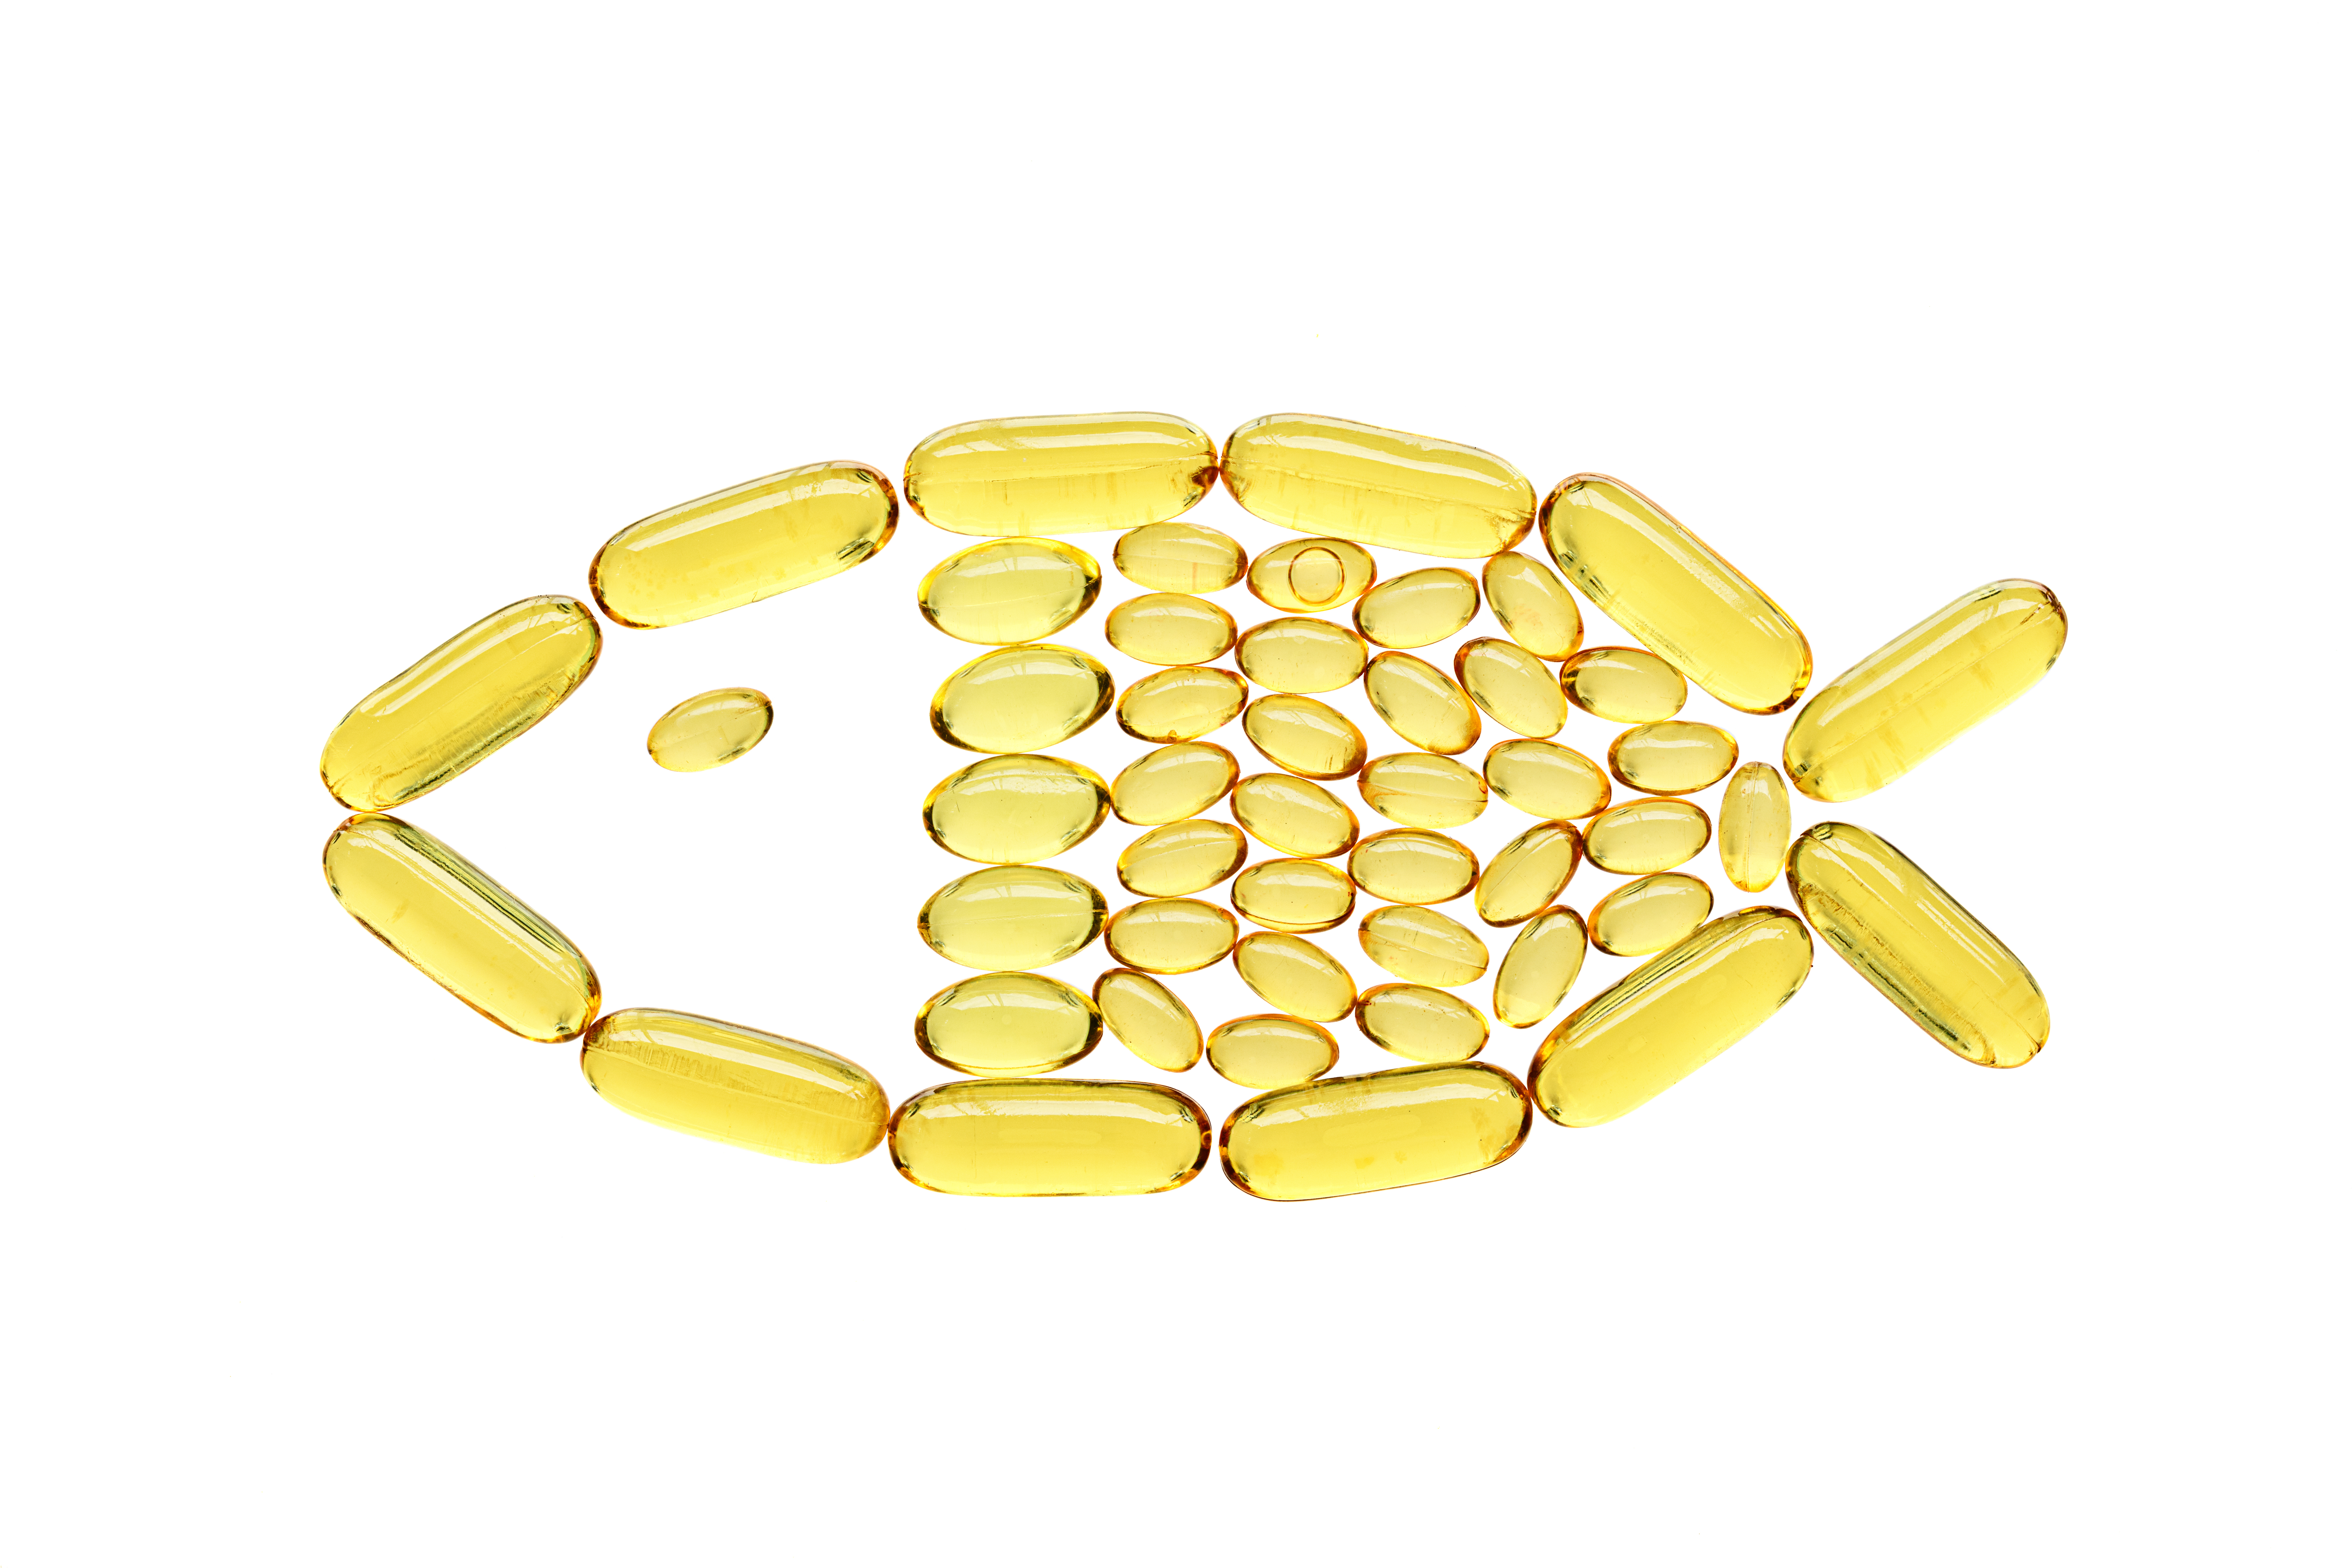 Fish oils help cancer patients improve nutrition and avoid weight loss